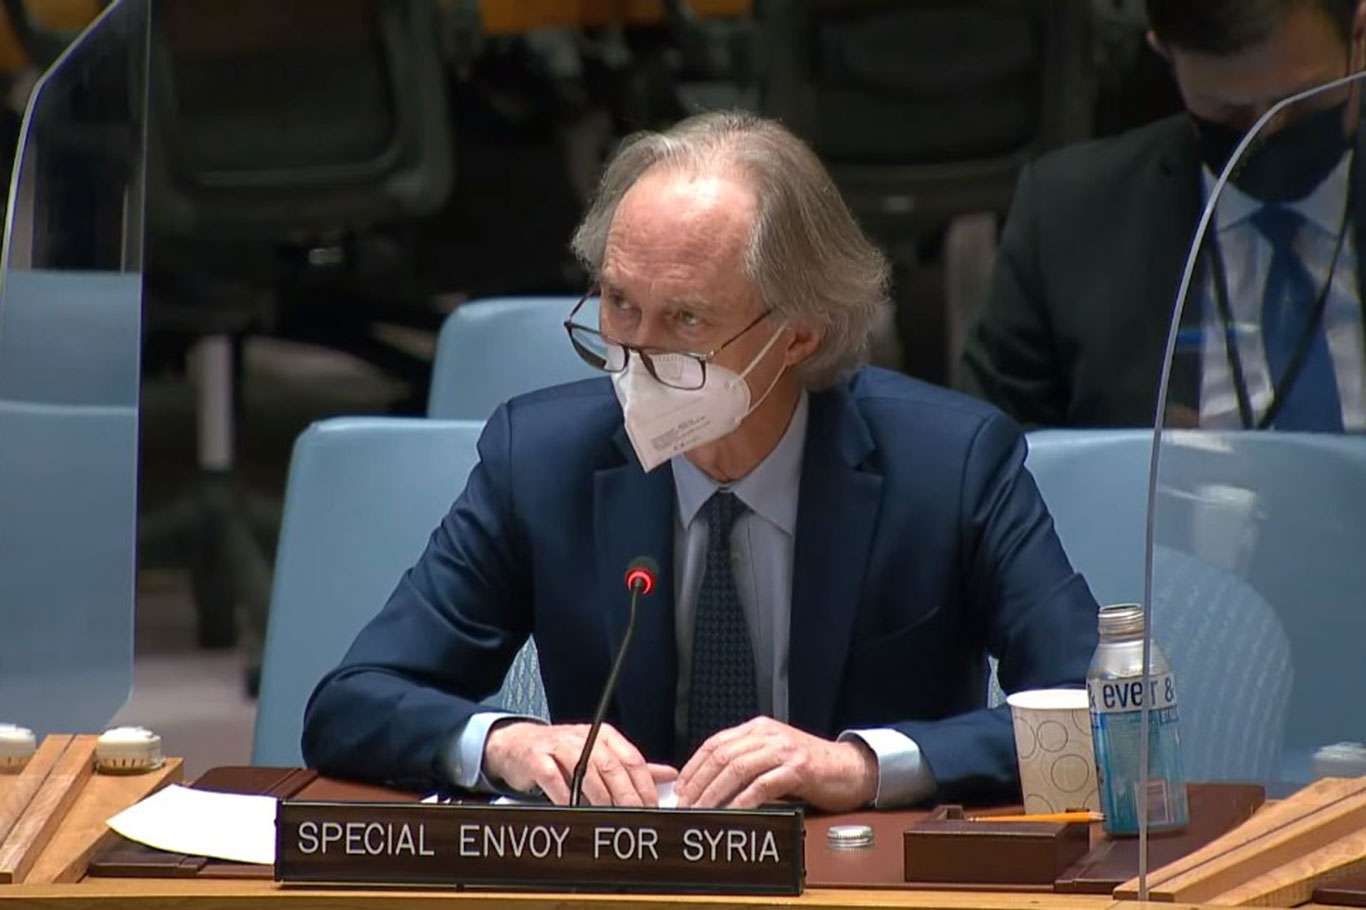 UN envoy: Military solution for Syria remains an illusion